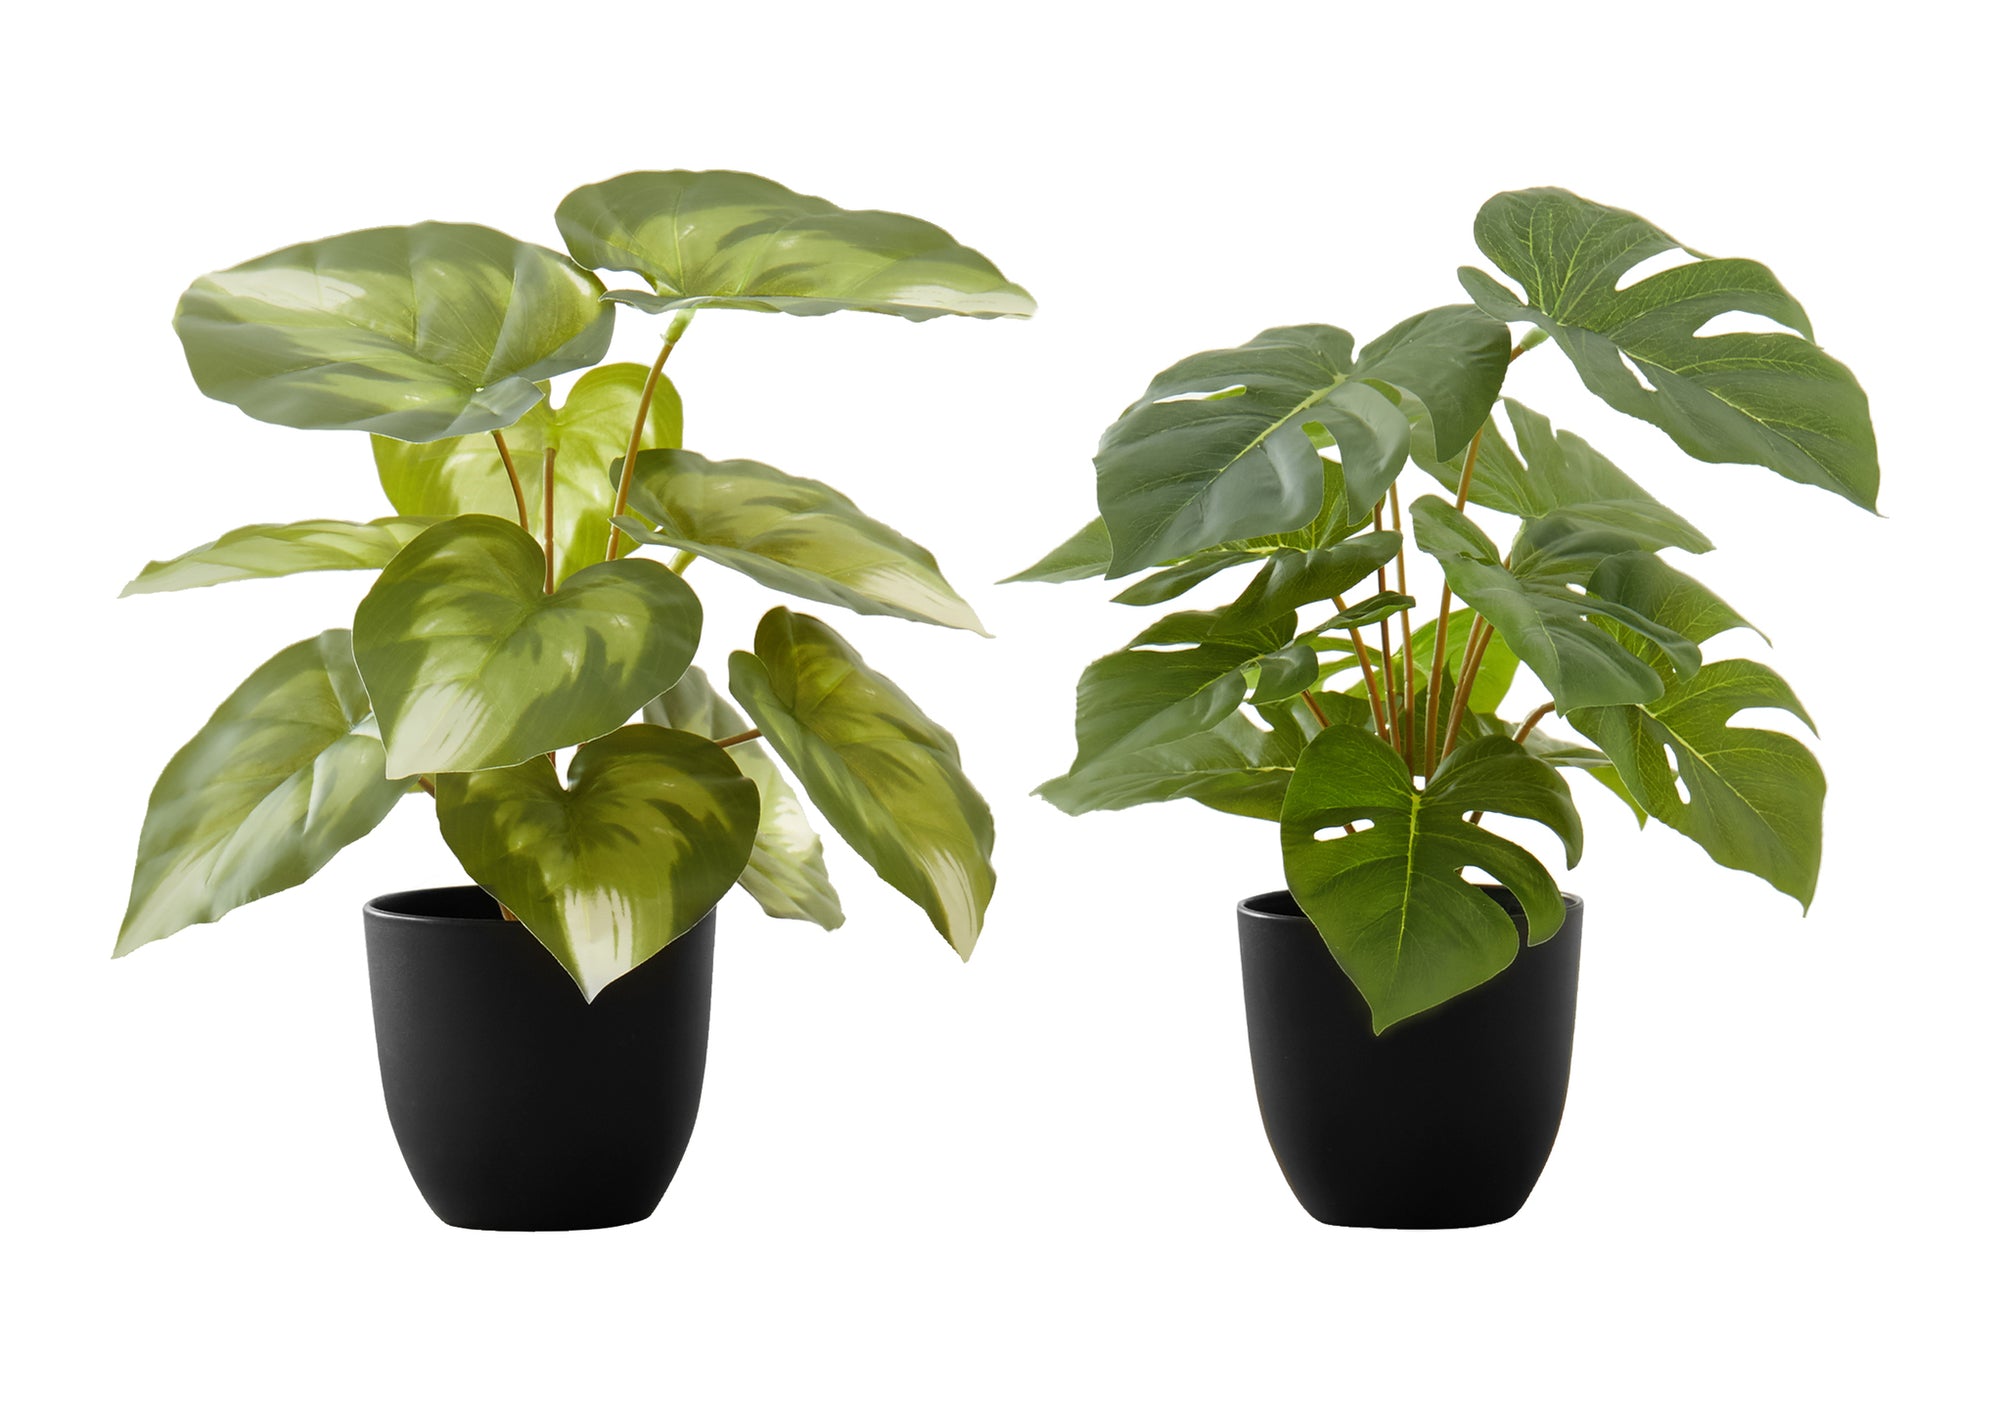 MN-749584    Artificial Plant, 13" Tall, Monstera Calthea, Indoor, Faux, Fake, Table, Greenery, Potted, Set Of 2, Decorative, Green Leaves, Black Pots